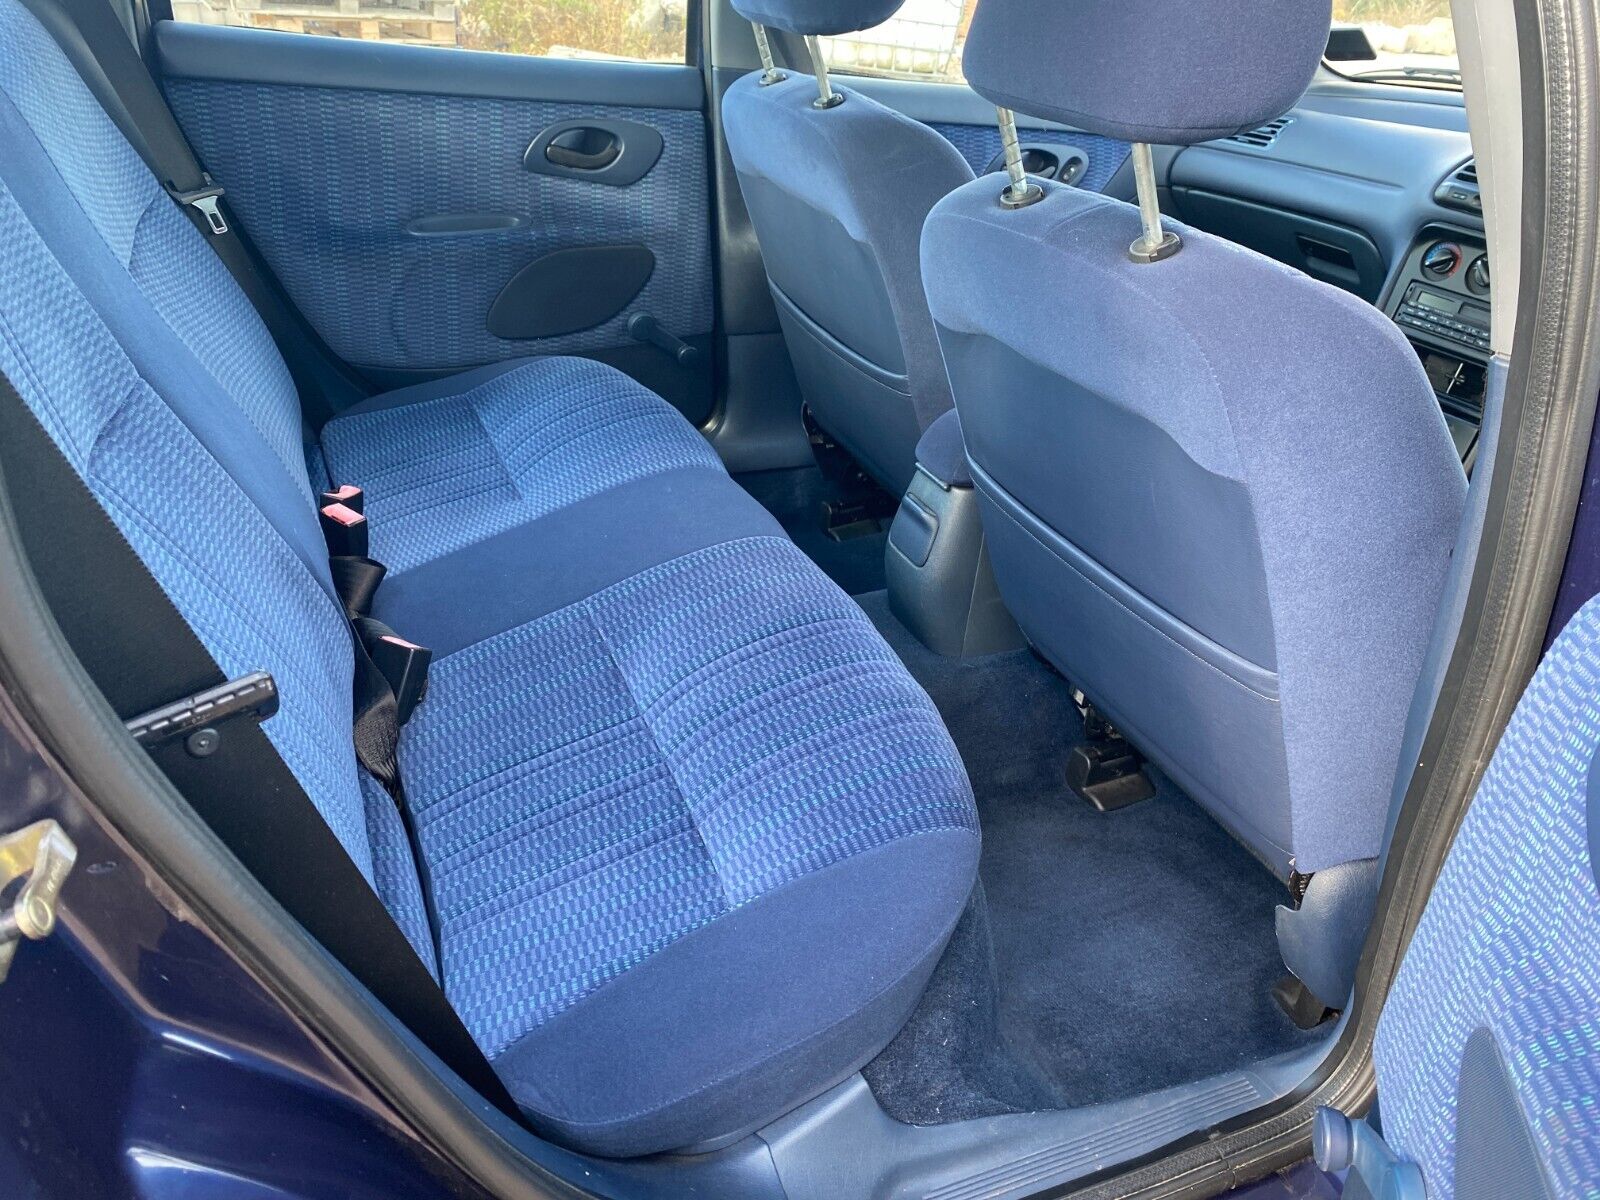 Ford Mondeo LX rear seats